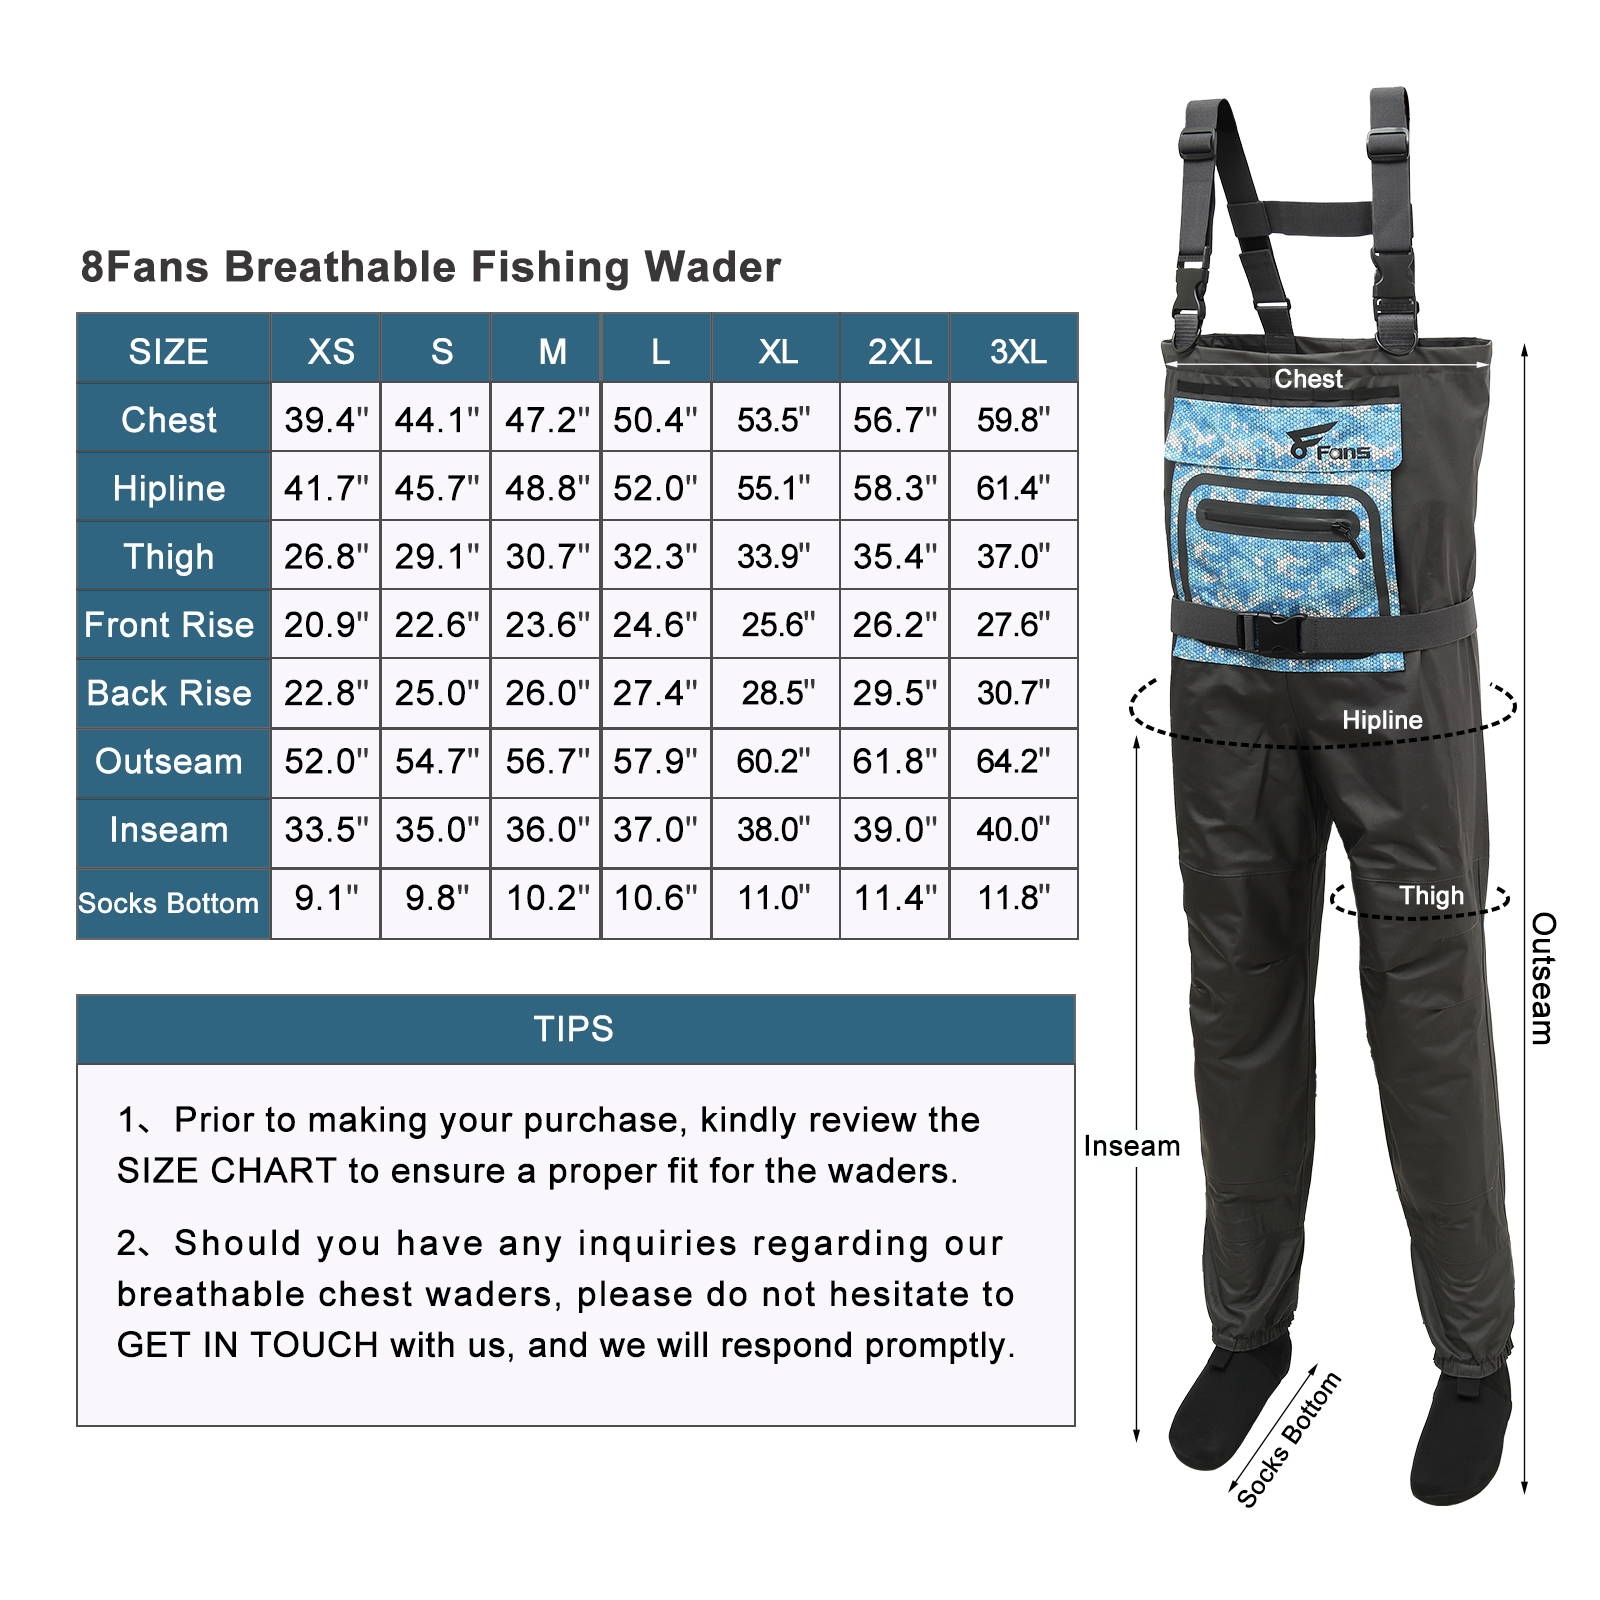 8 Fans Breathable Chest Wader for Men Stocking Foot 3-Ply 100% Durable and  Waterproof Insulated Chest Waders for Fishing